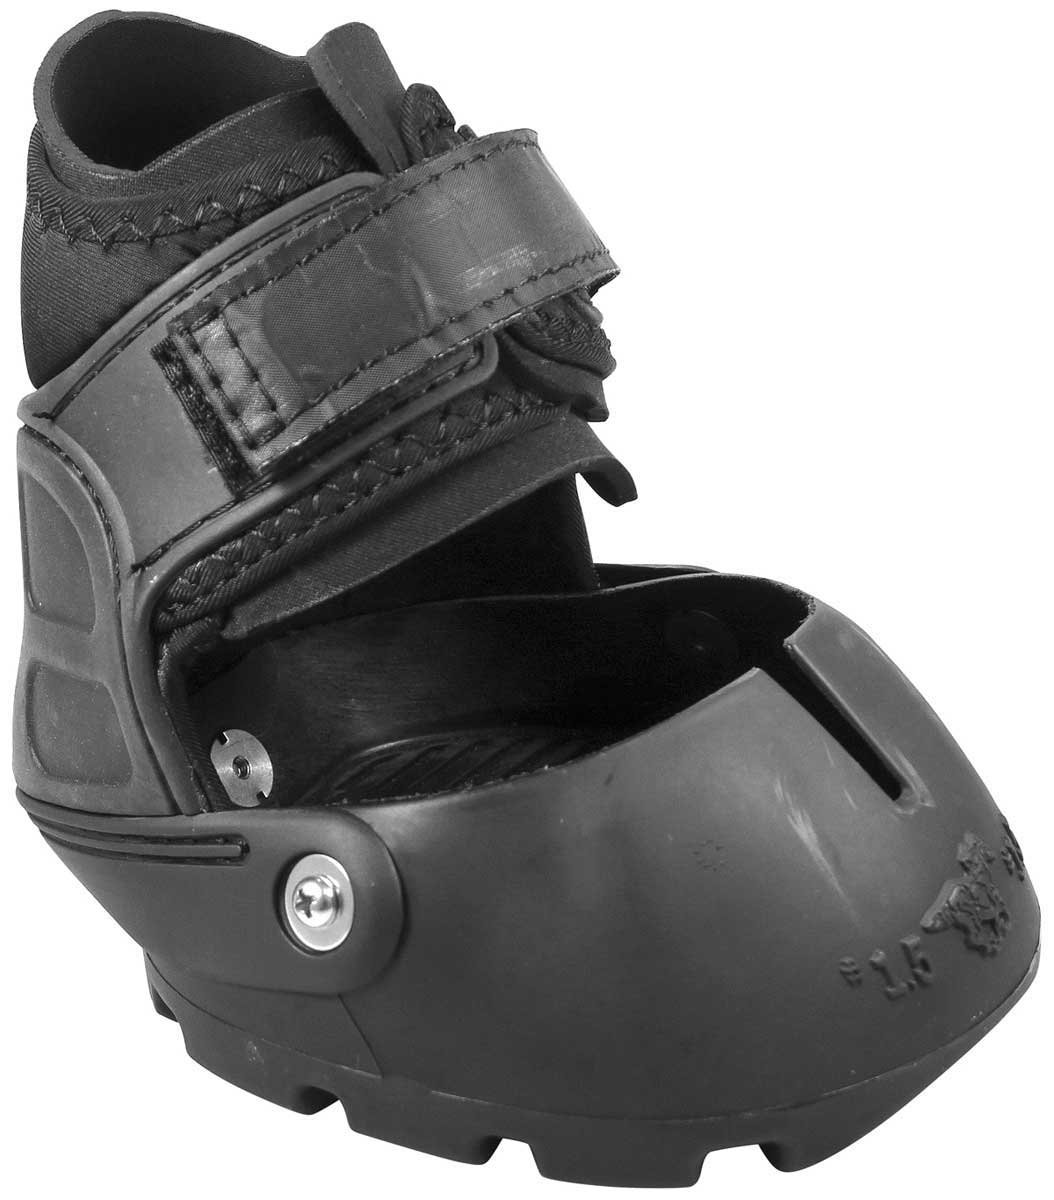 Easyboot glove back country horse boot - goalvse